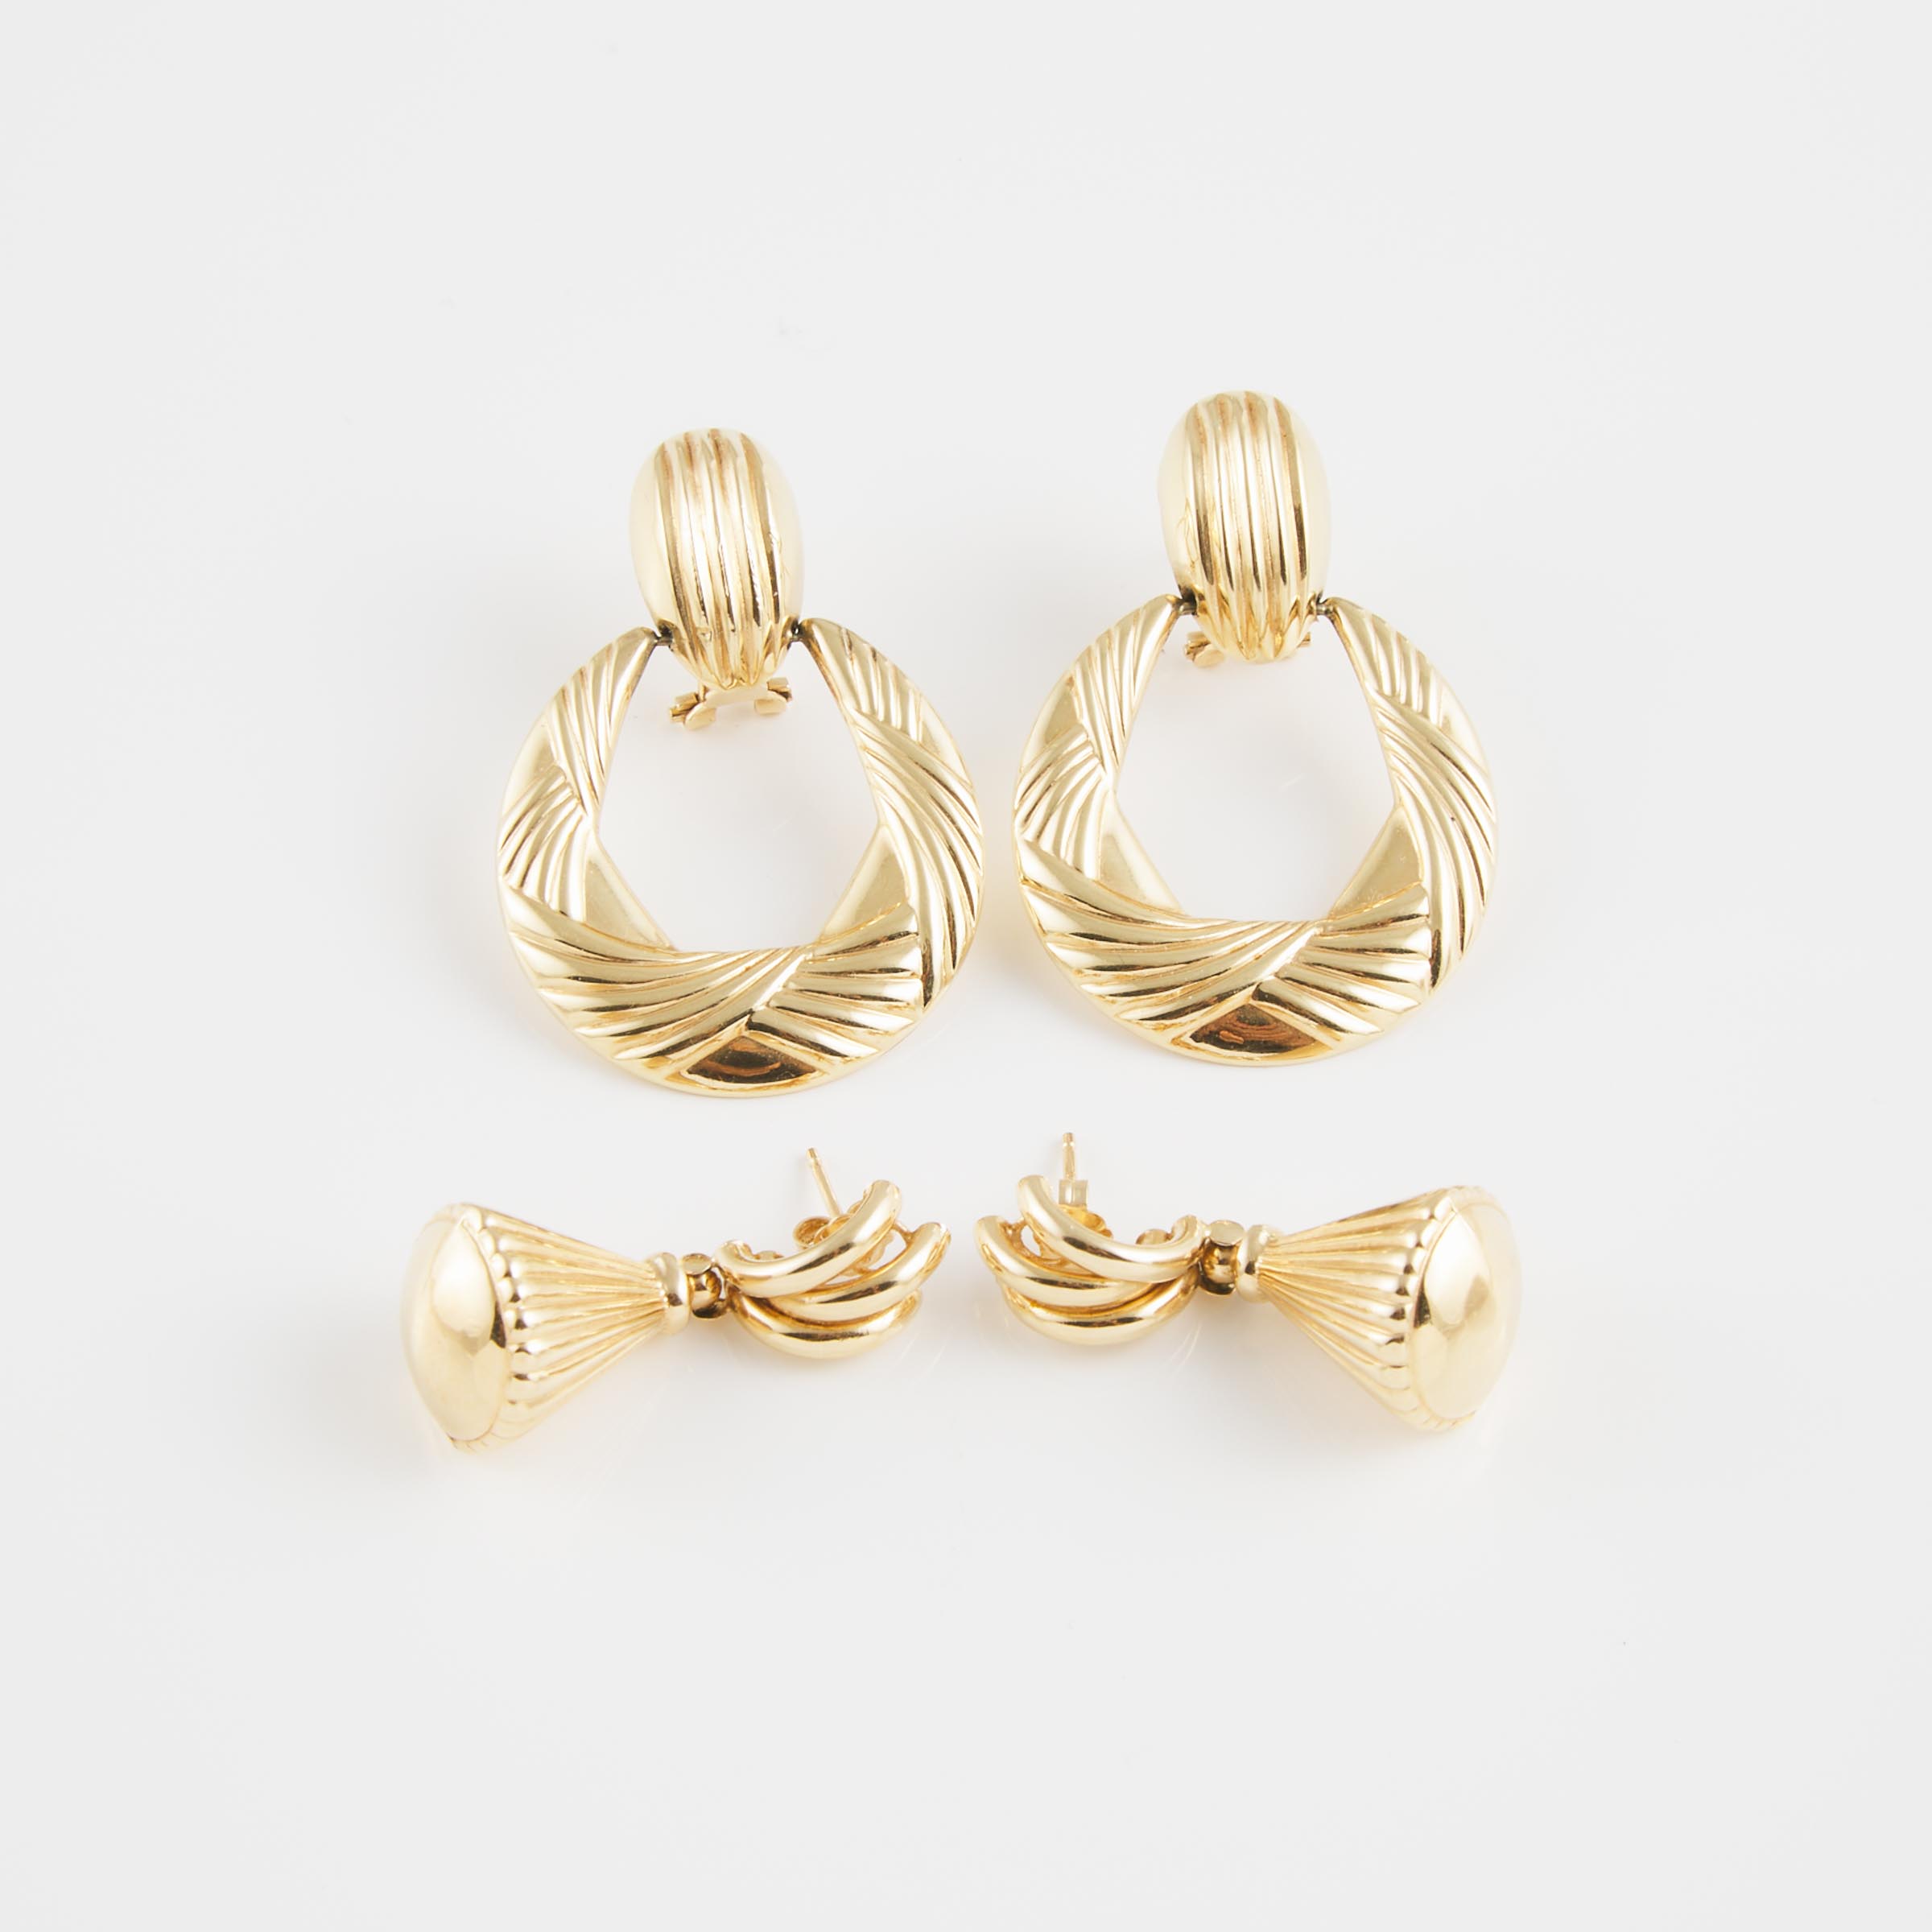 2 Pairs Of 14k Yellow Gold Earrings